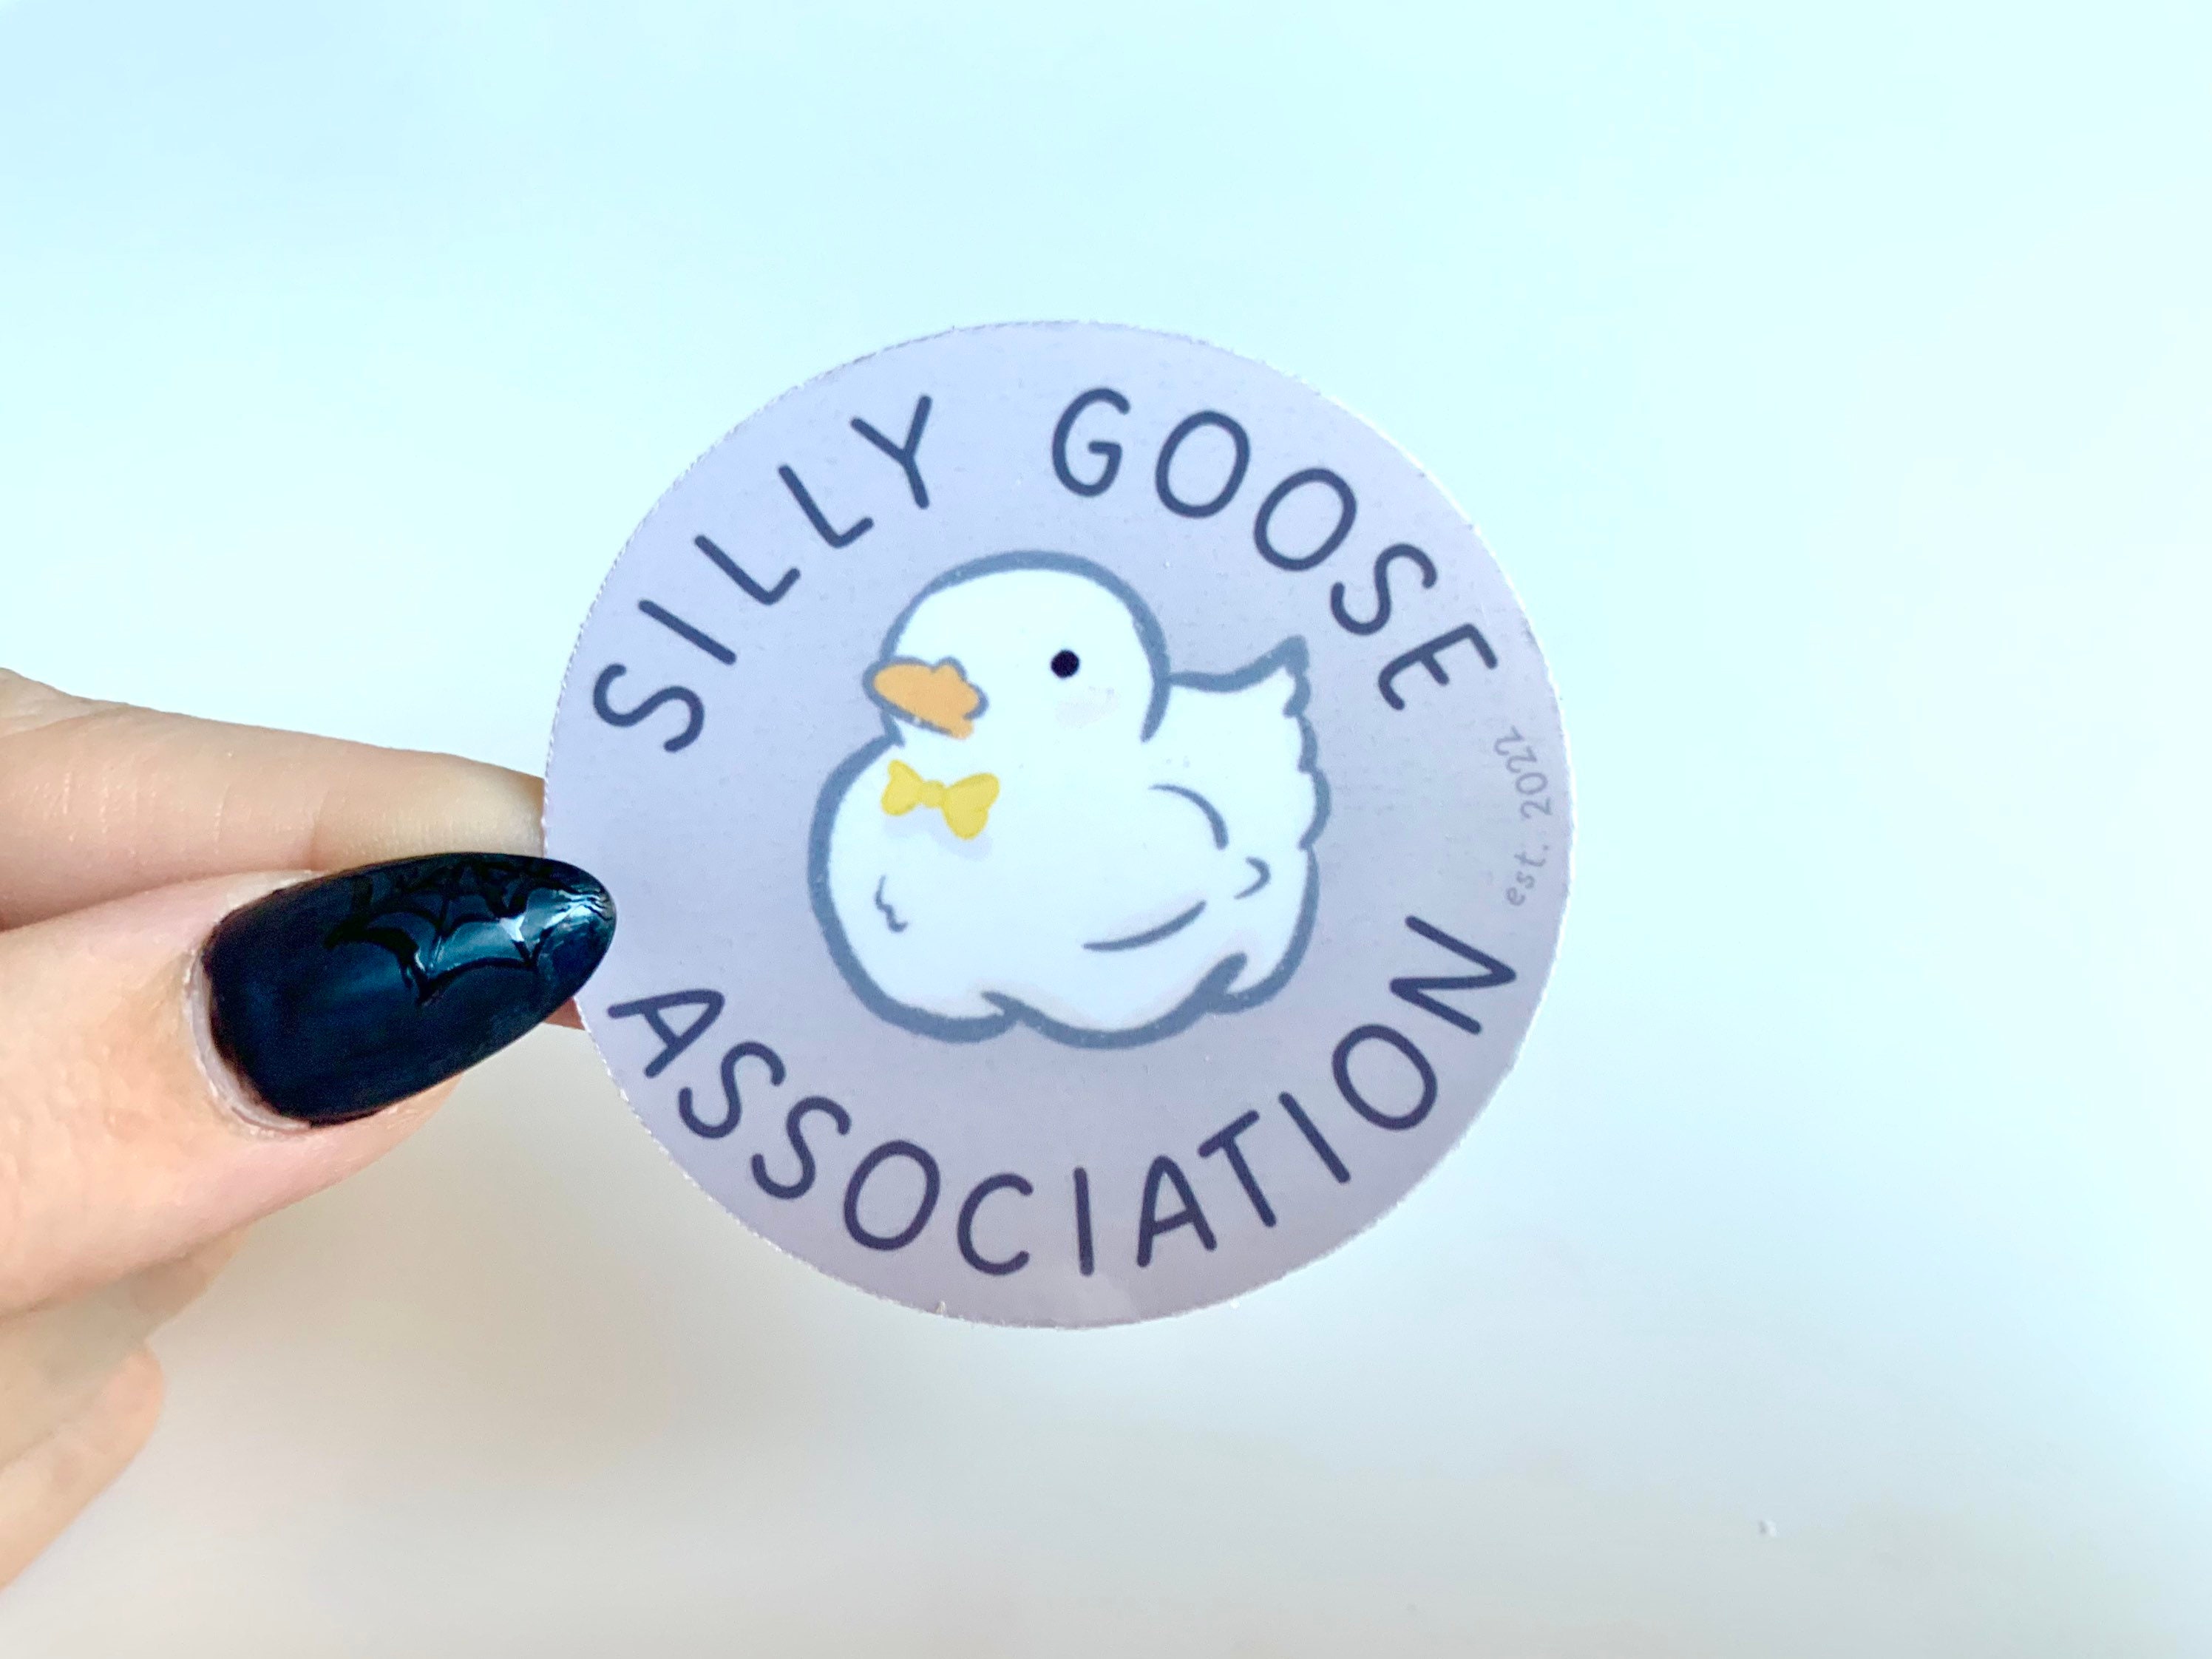 Silly Goose, Funny Stickers, Hello I'm A Silly Goose, Laptop Stickers 